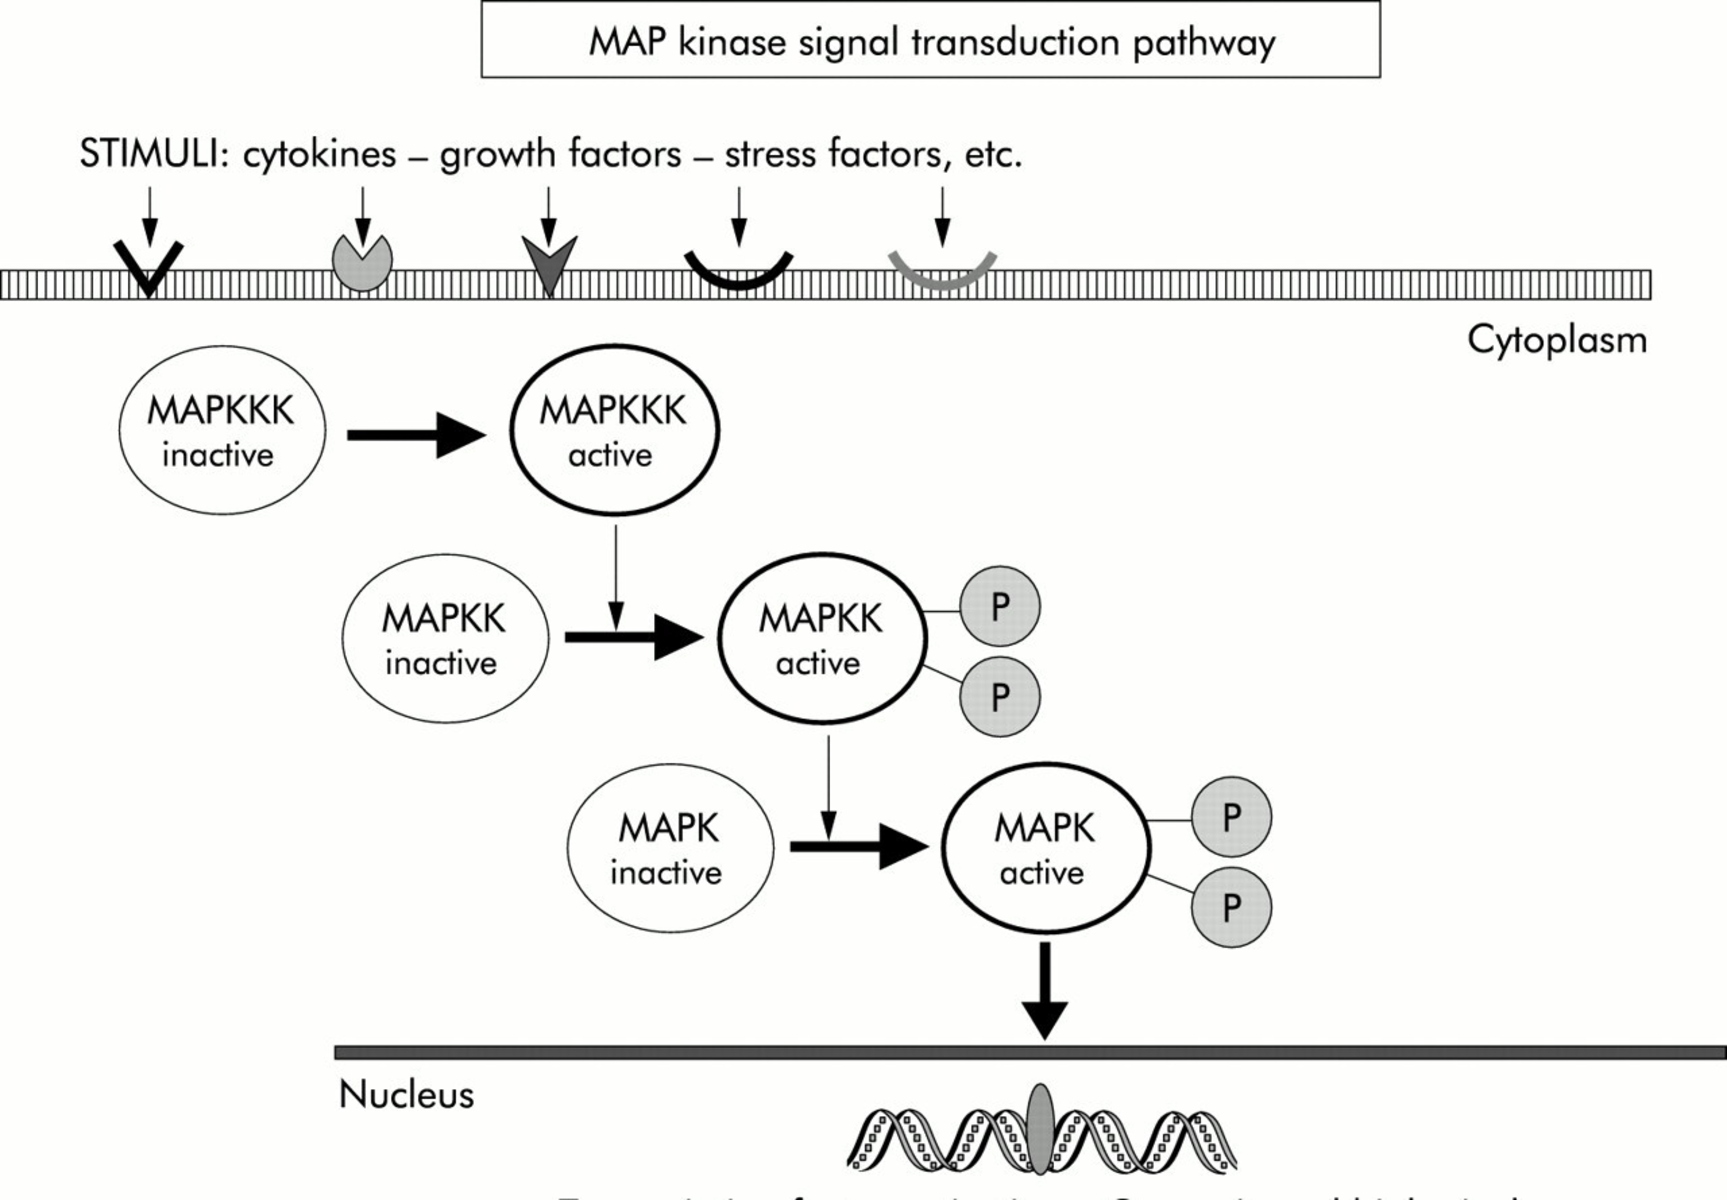 8-surprising-facts-about-mapk-mitogen-activated-protein-kinase-pathway